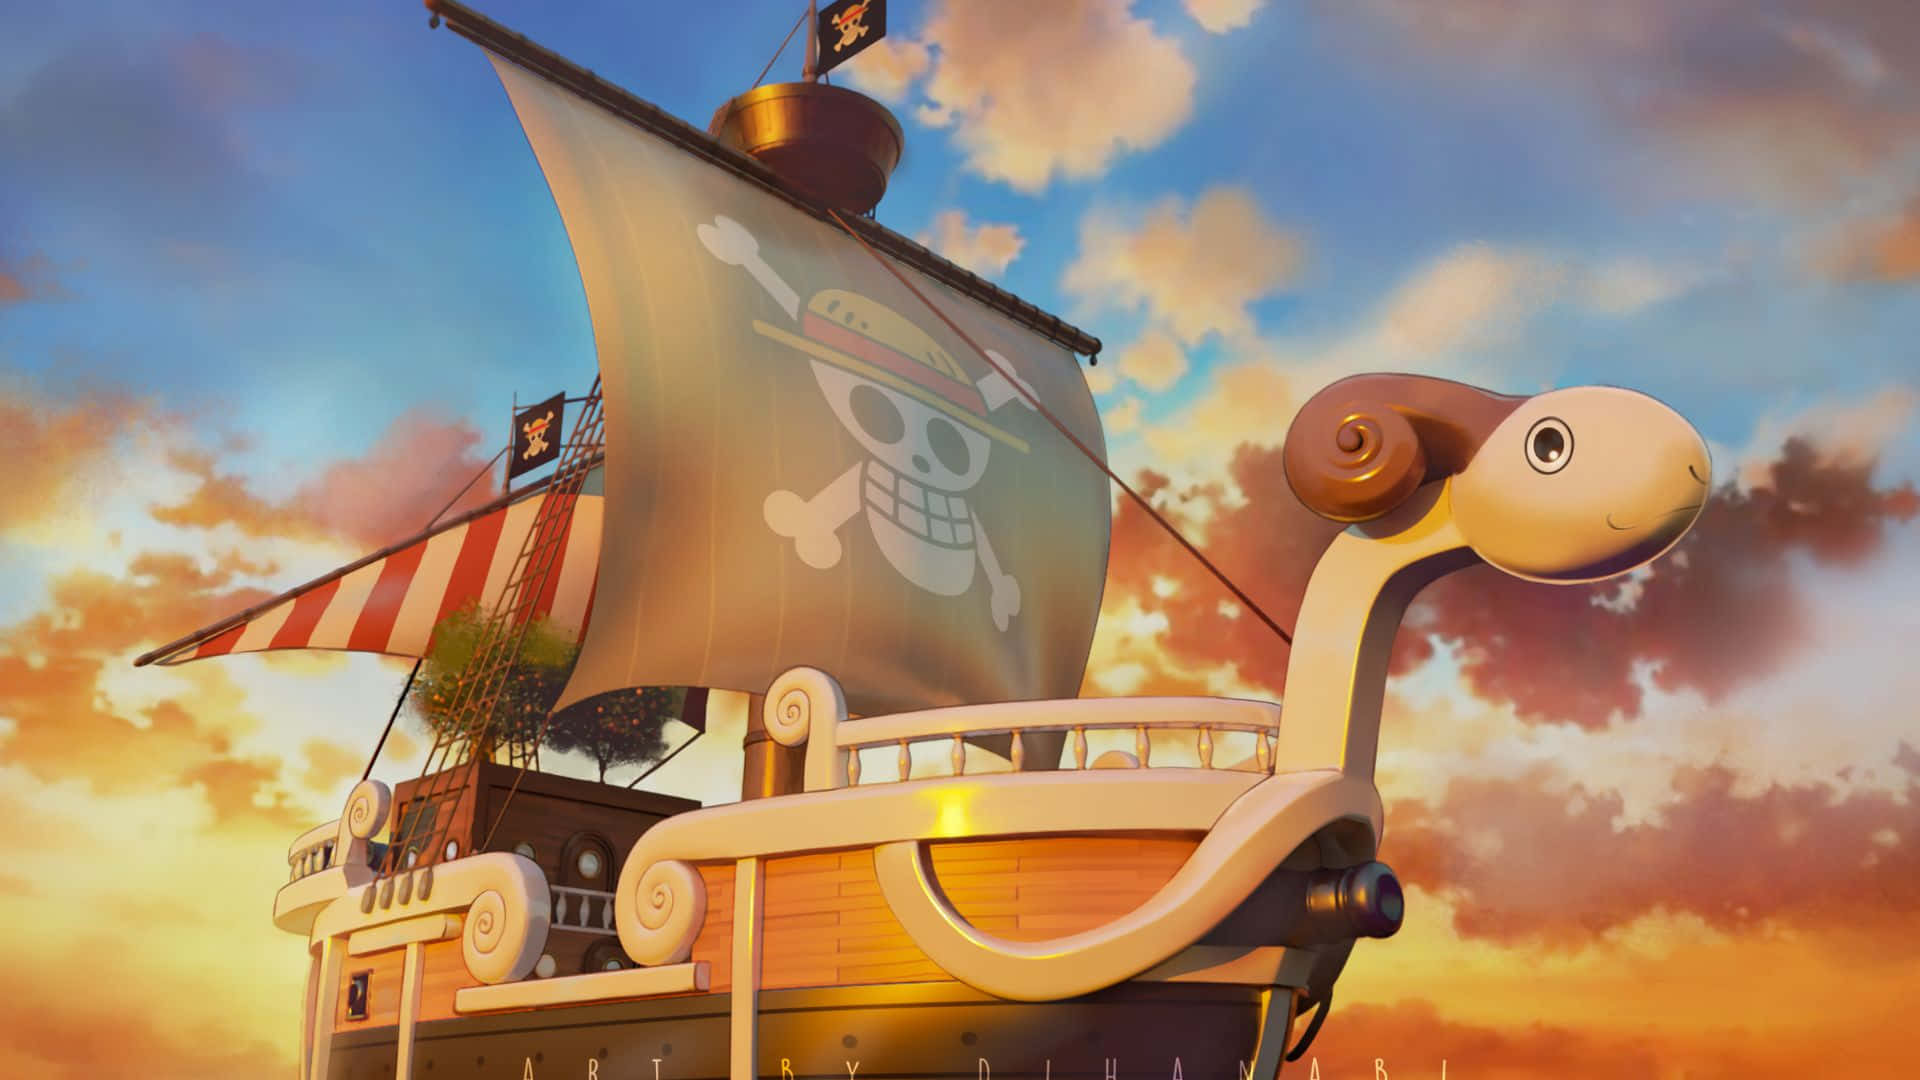 “Setting sail on Going Merry” Wallpaper